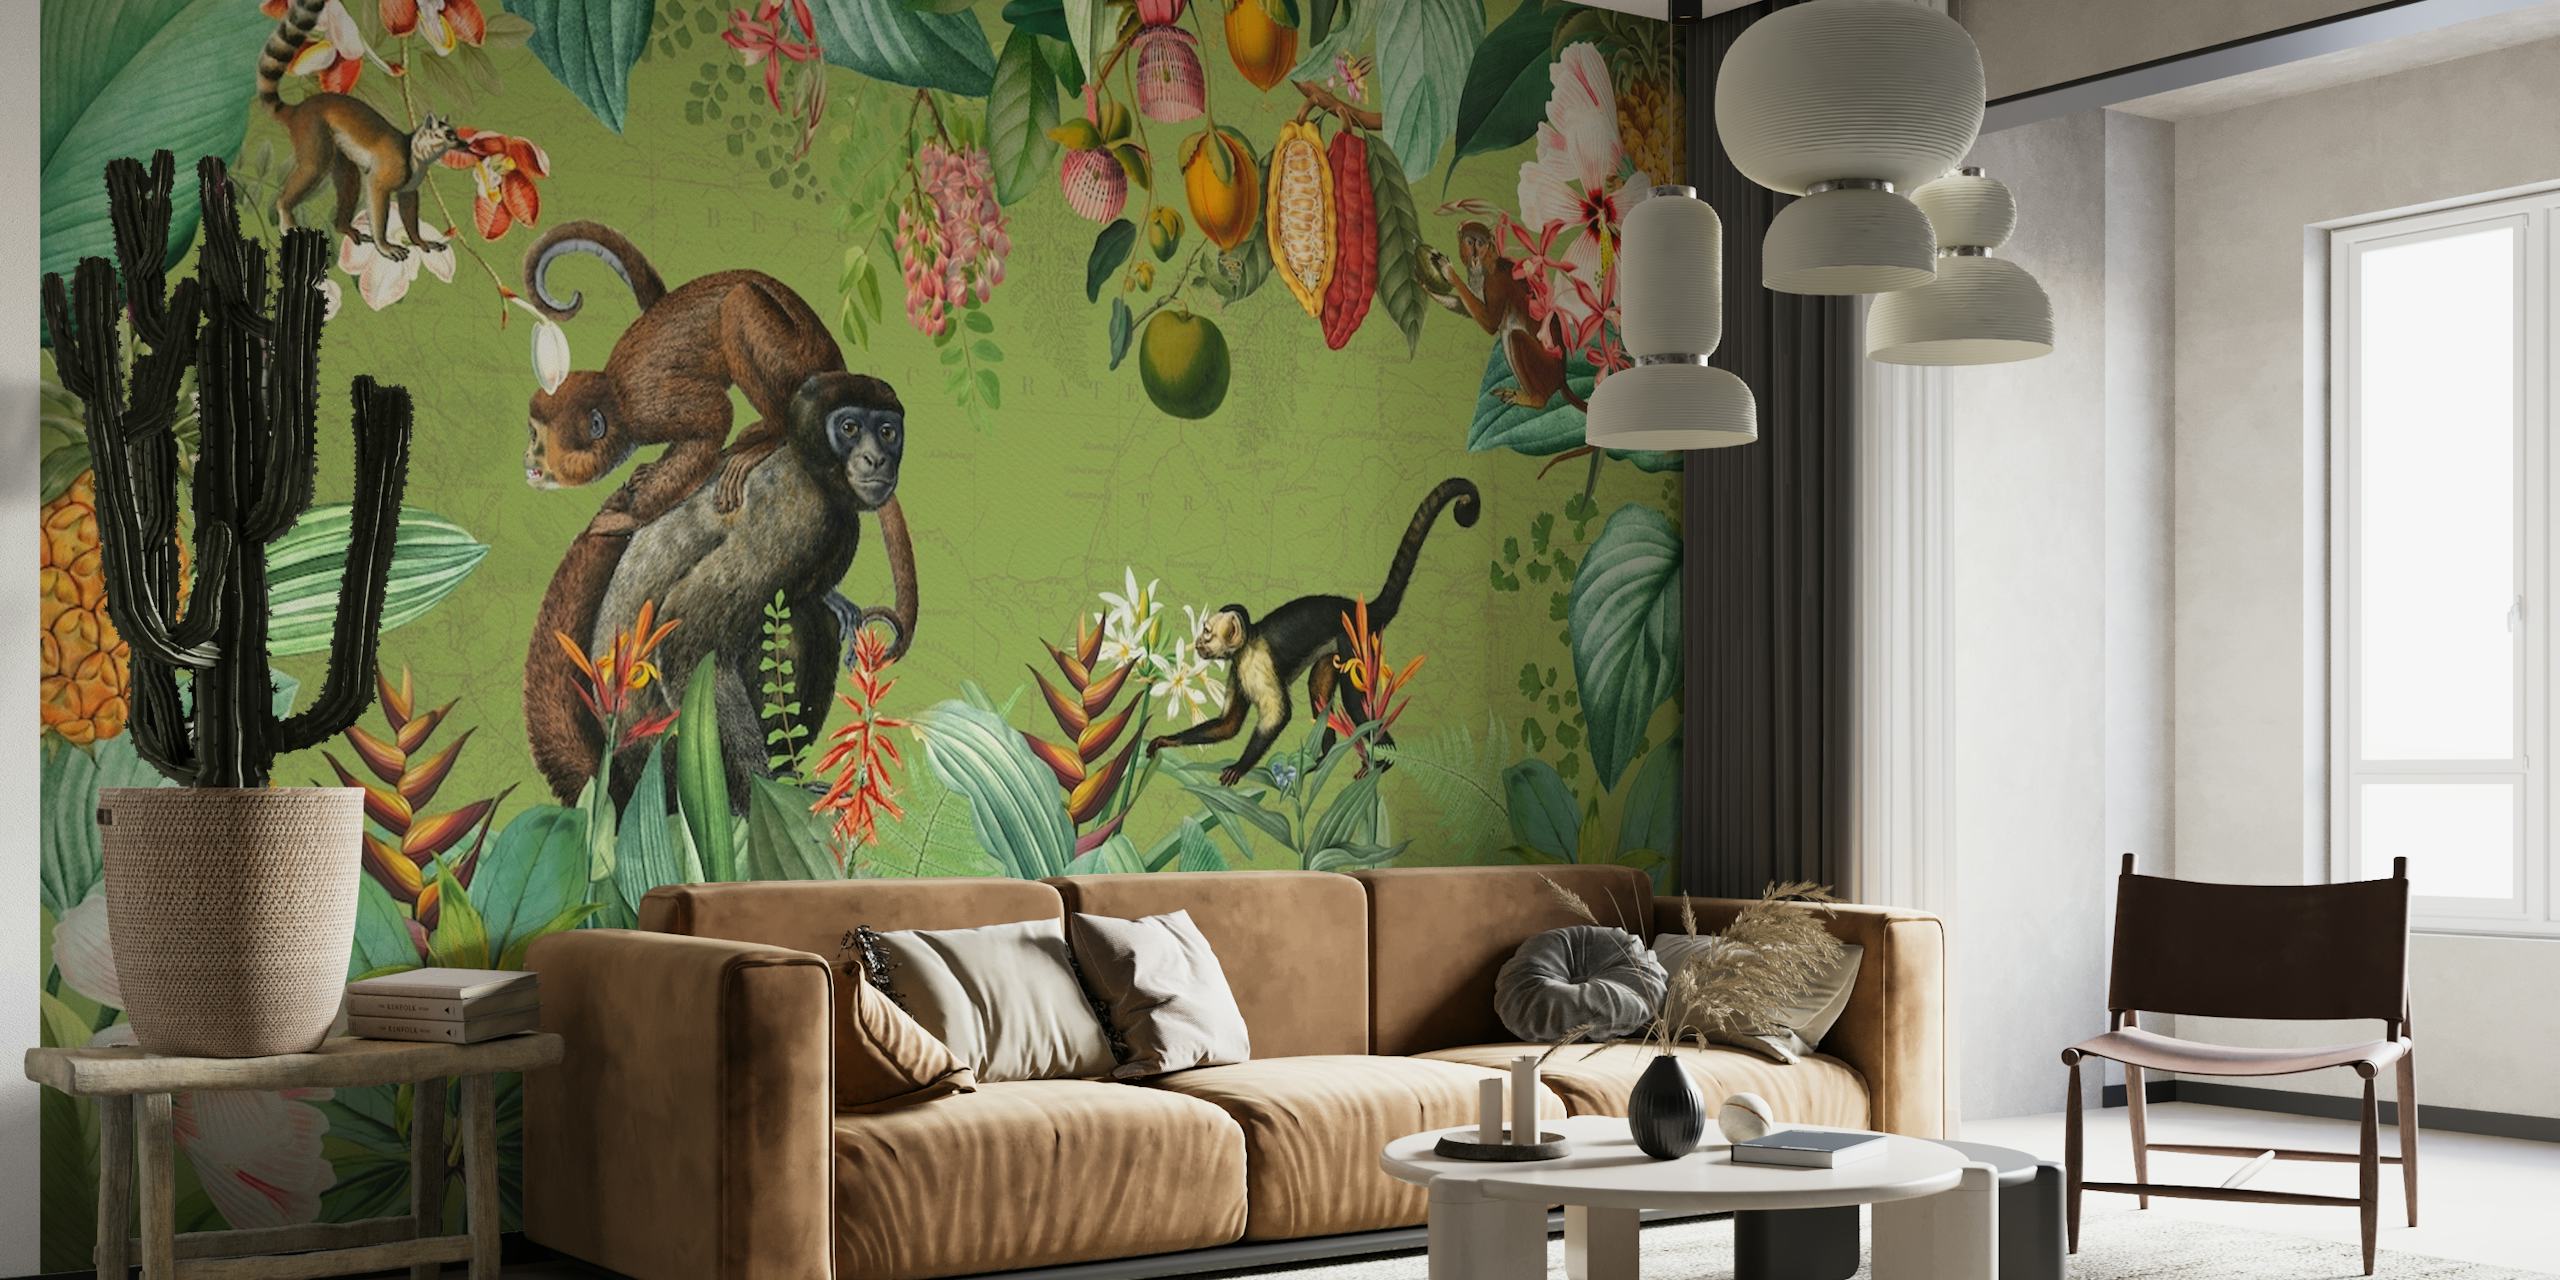 A vintage-style wall mural depicting monkeys and tropical plants in an African jungle setting